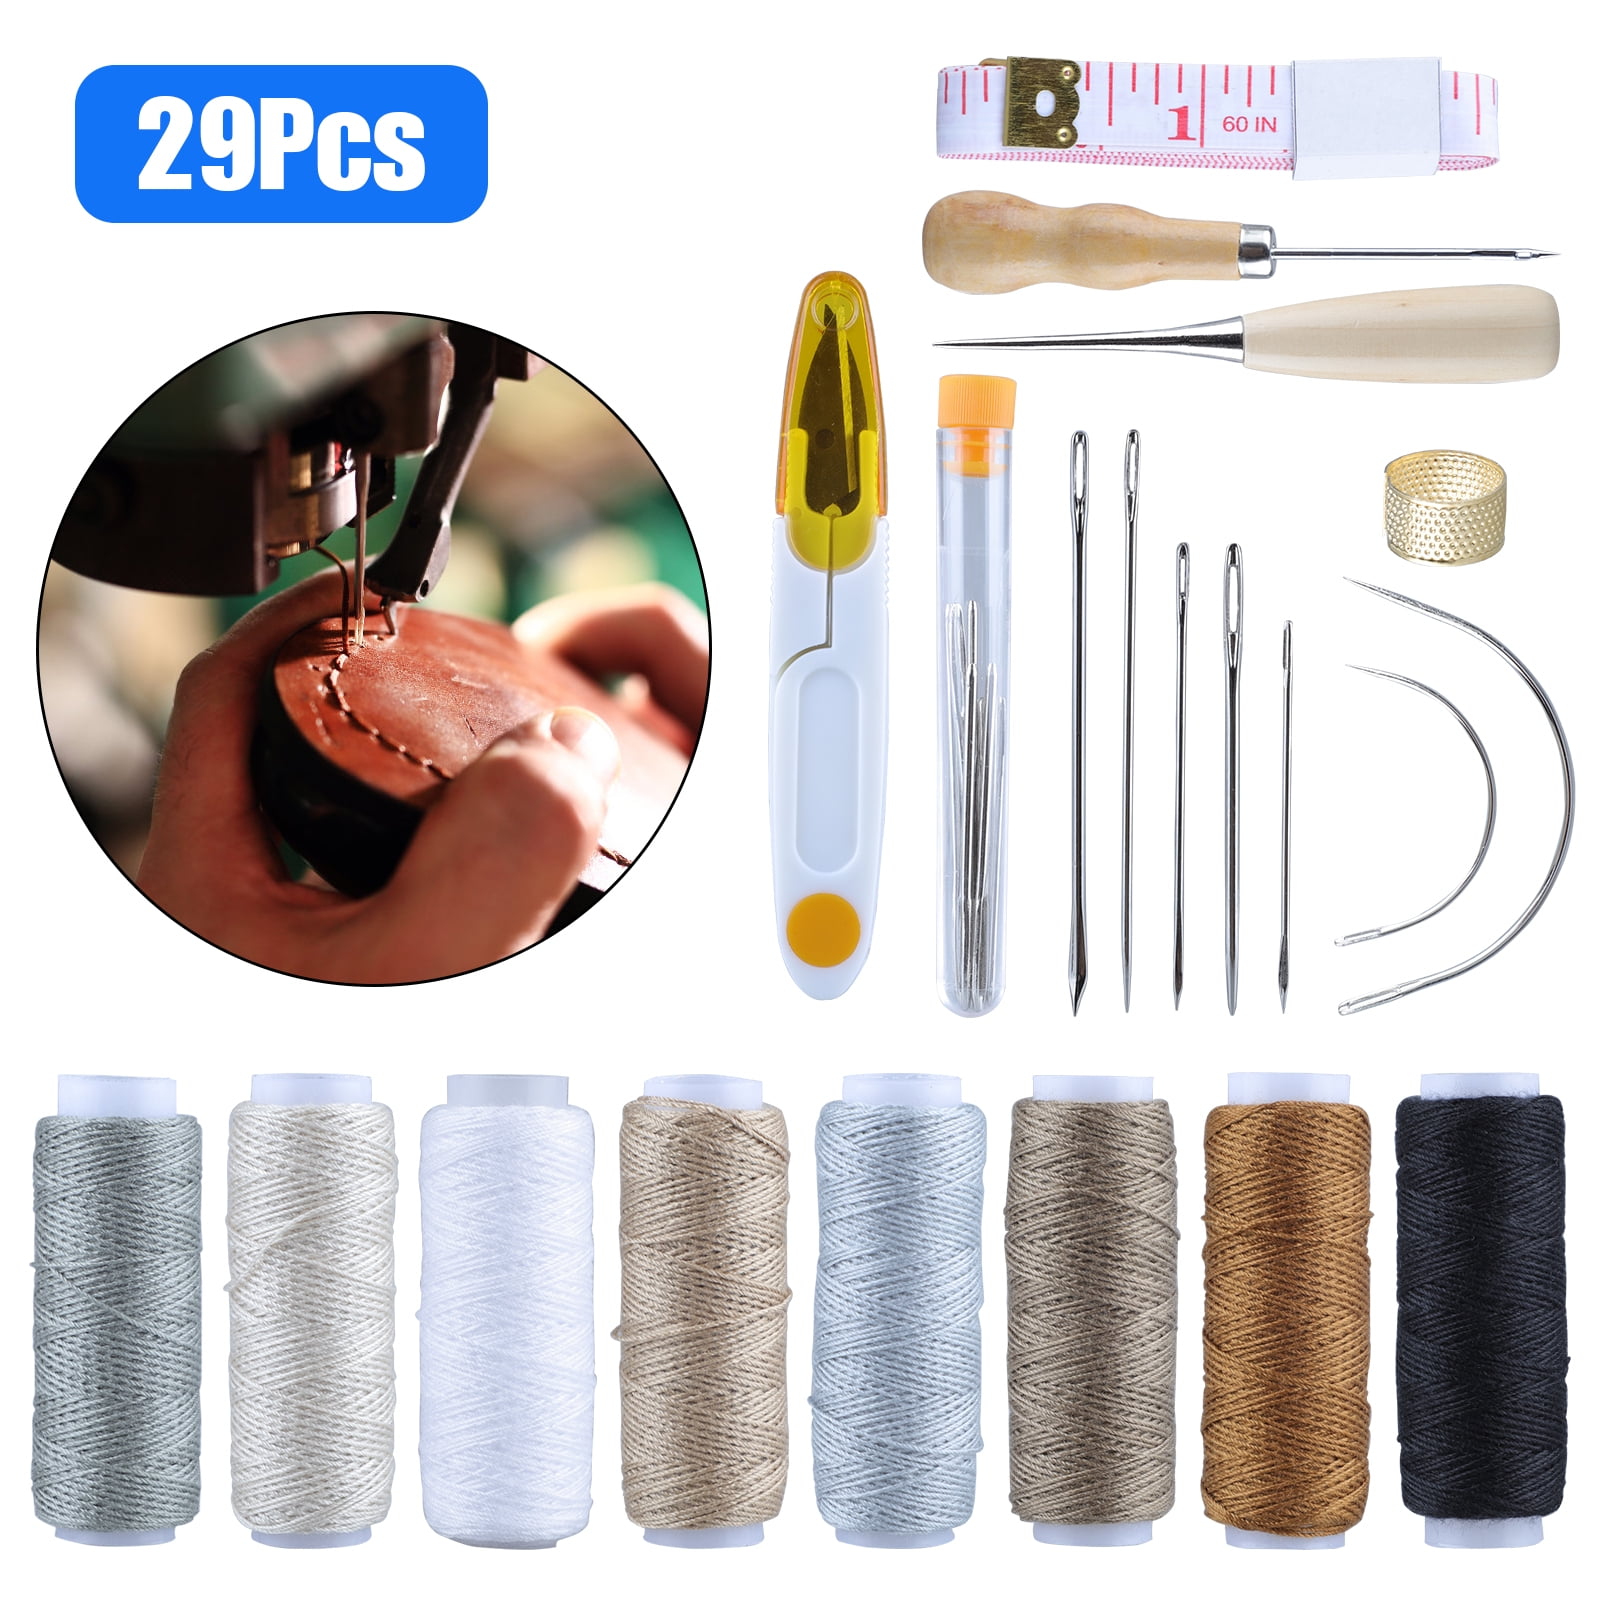 29Pcs Leather Waxed Thread Stitching Needles Awl Hand Tools for DIY Sewing Craft 